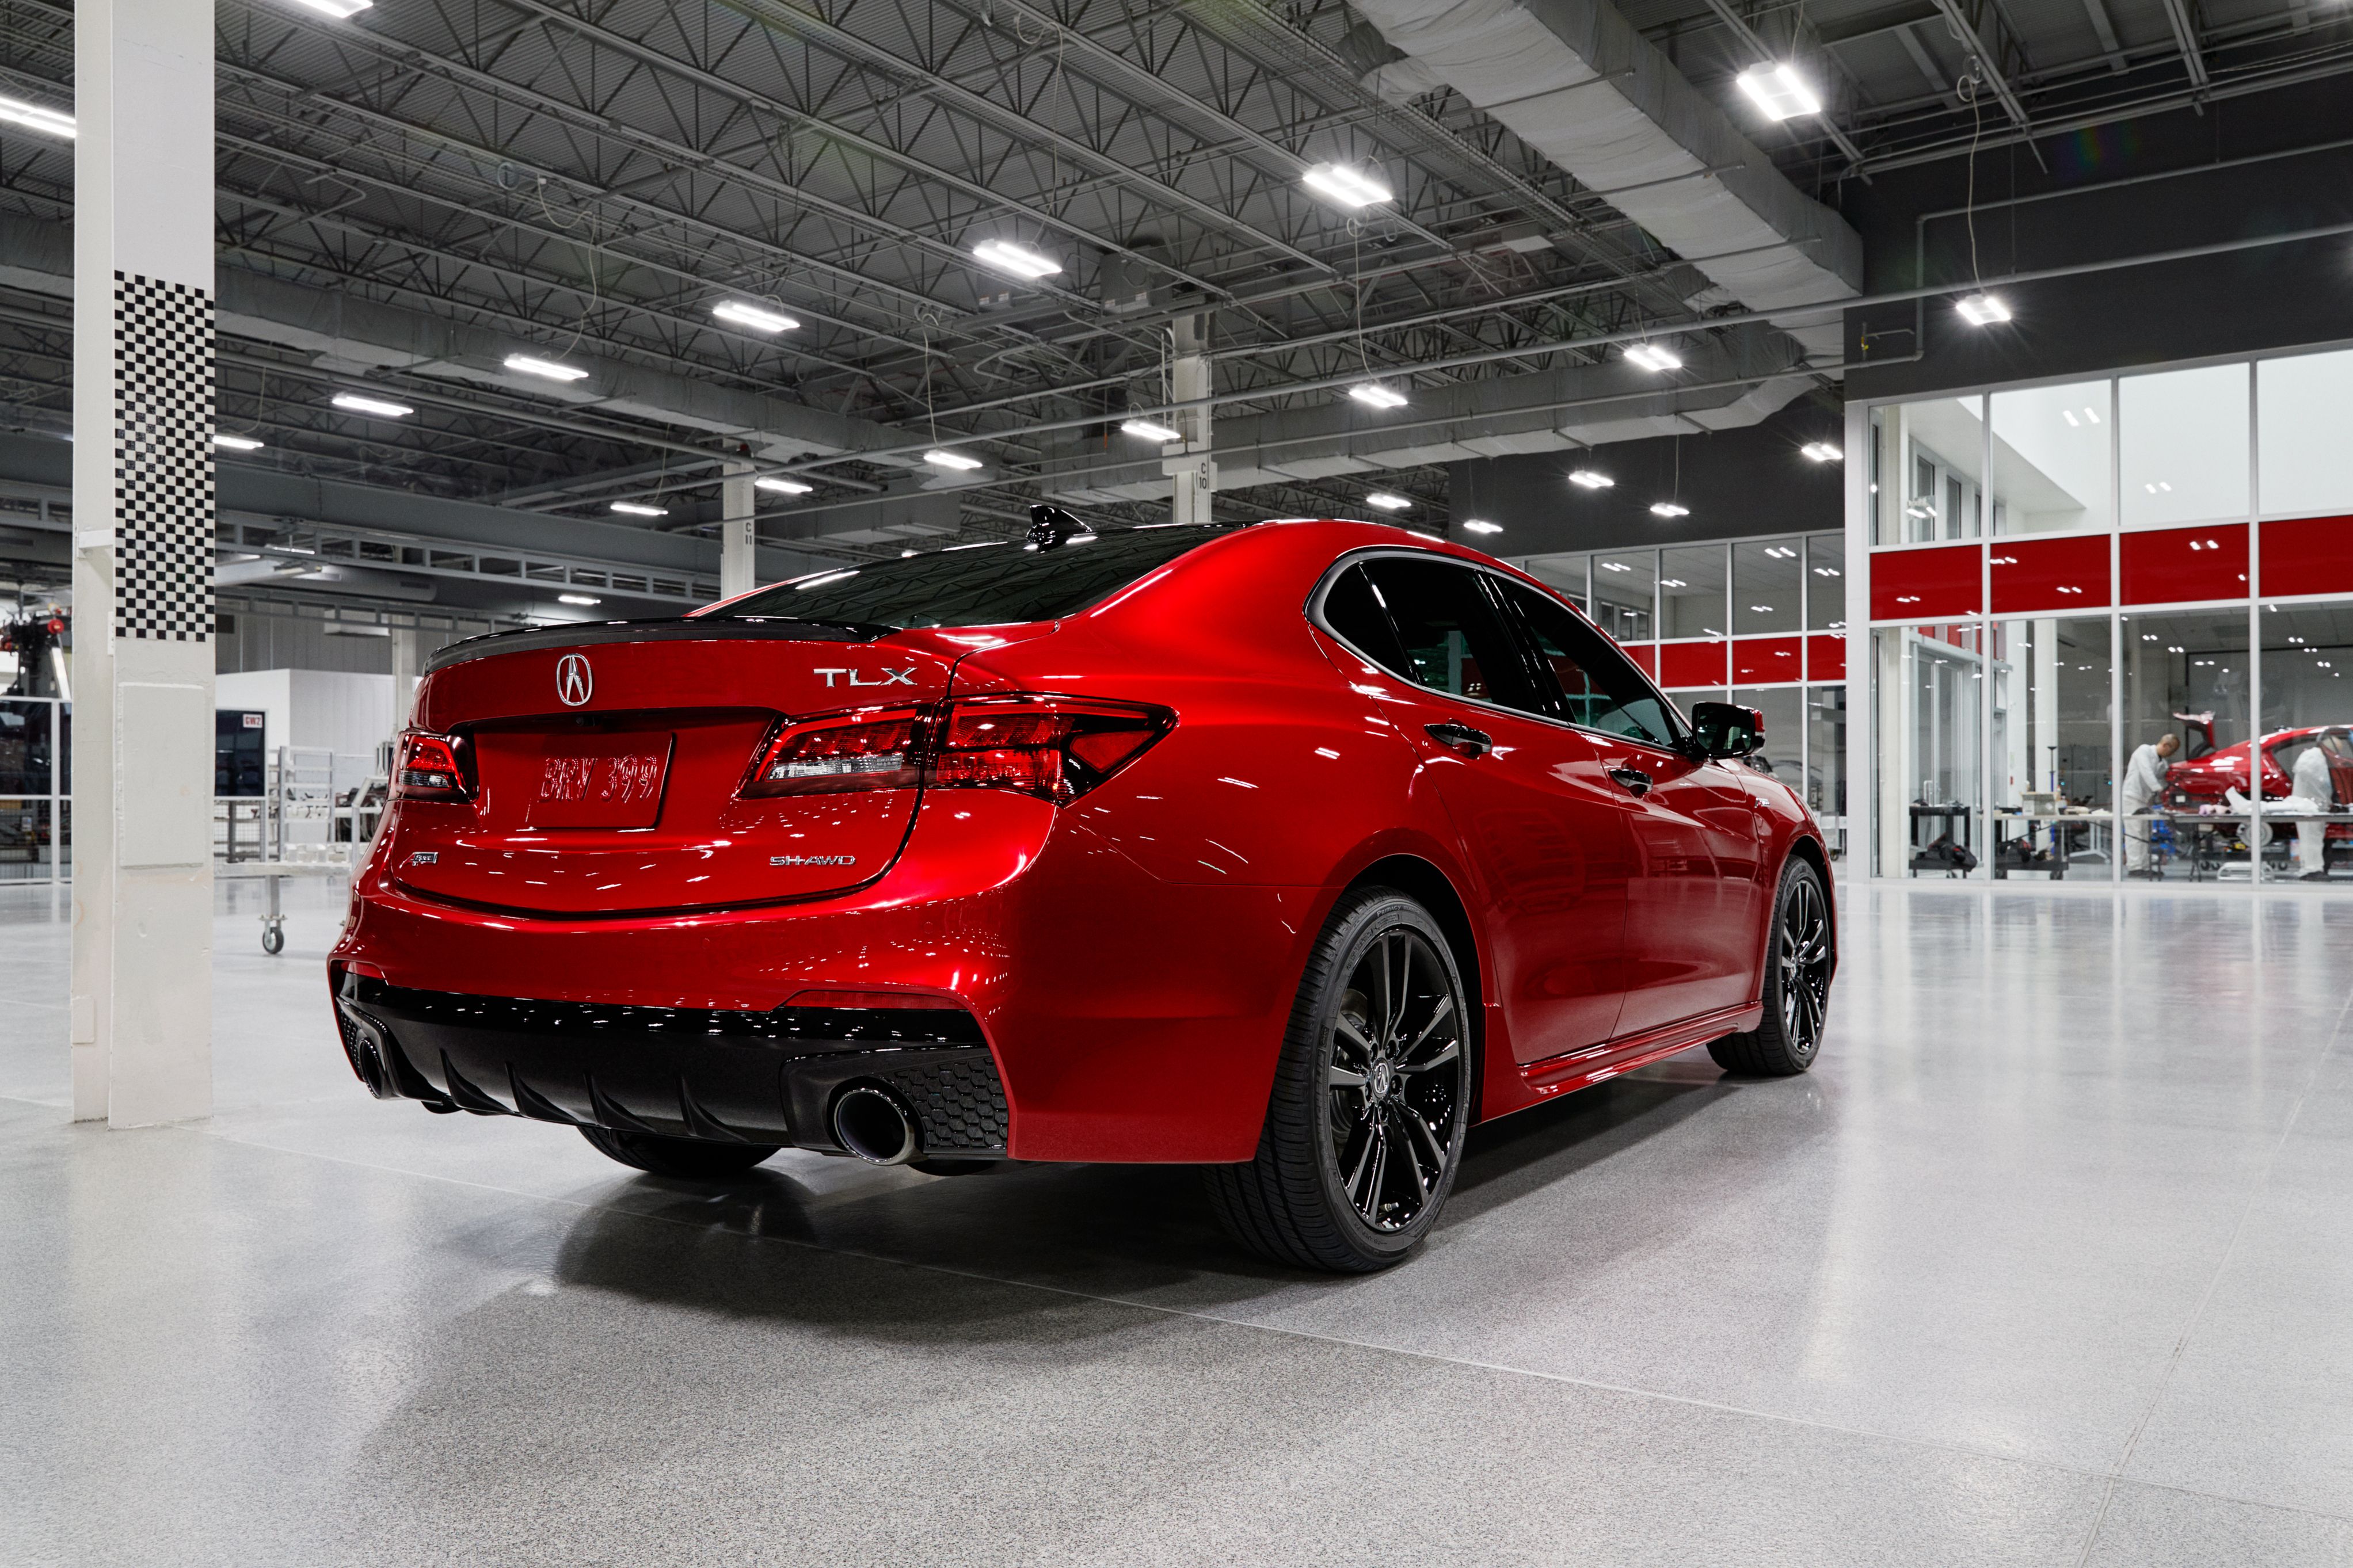 2019 Acura TLX PMC Edition